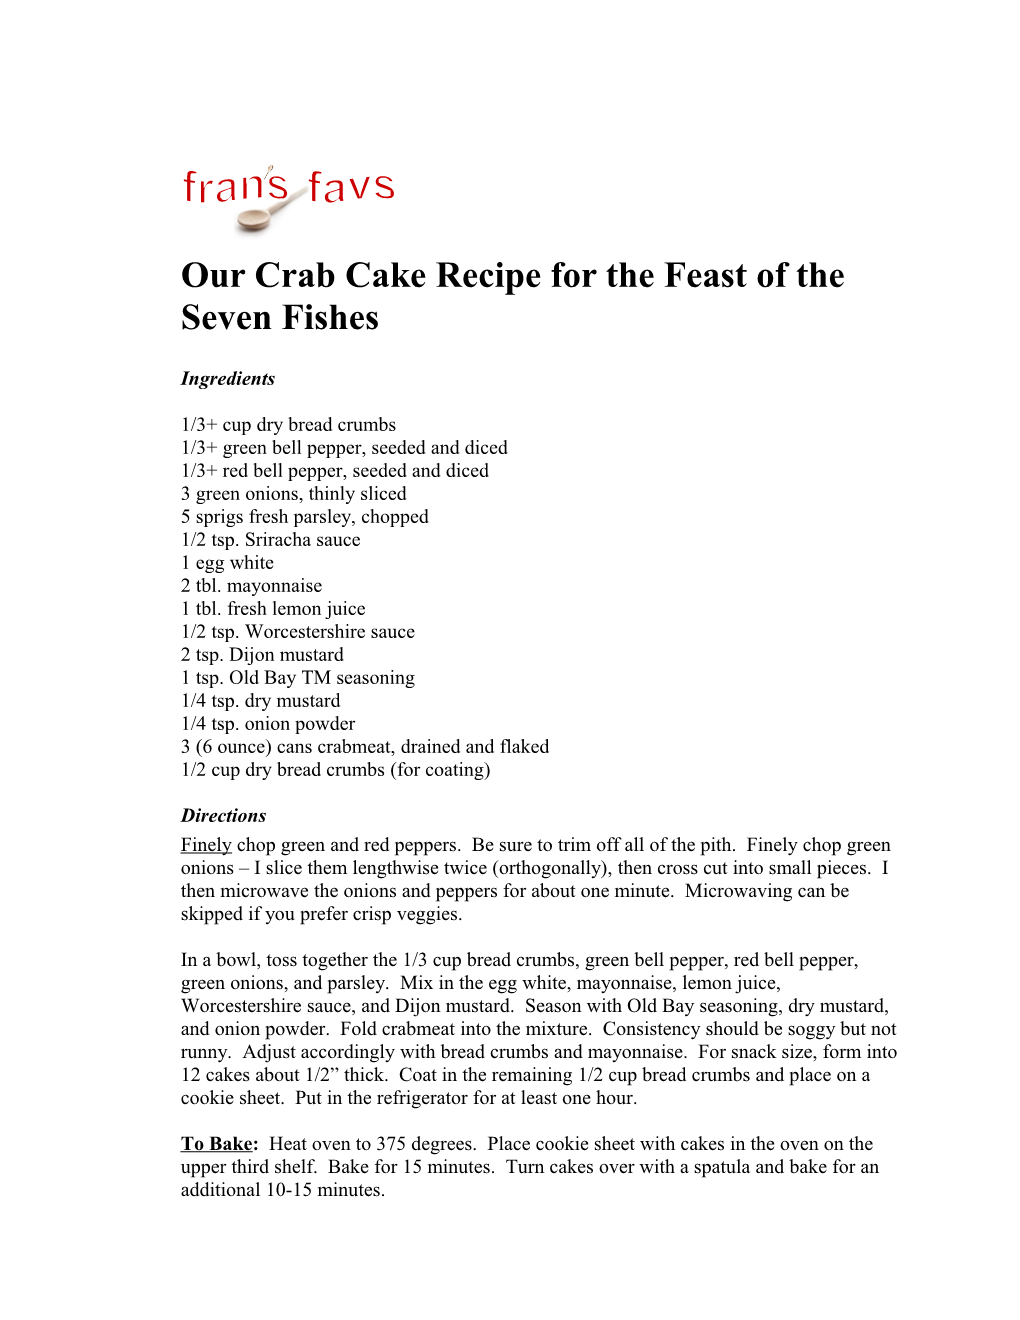 Our Crab Cake Recipe for the Feast of the Seven Fishes